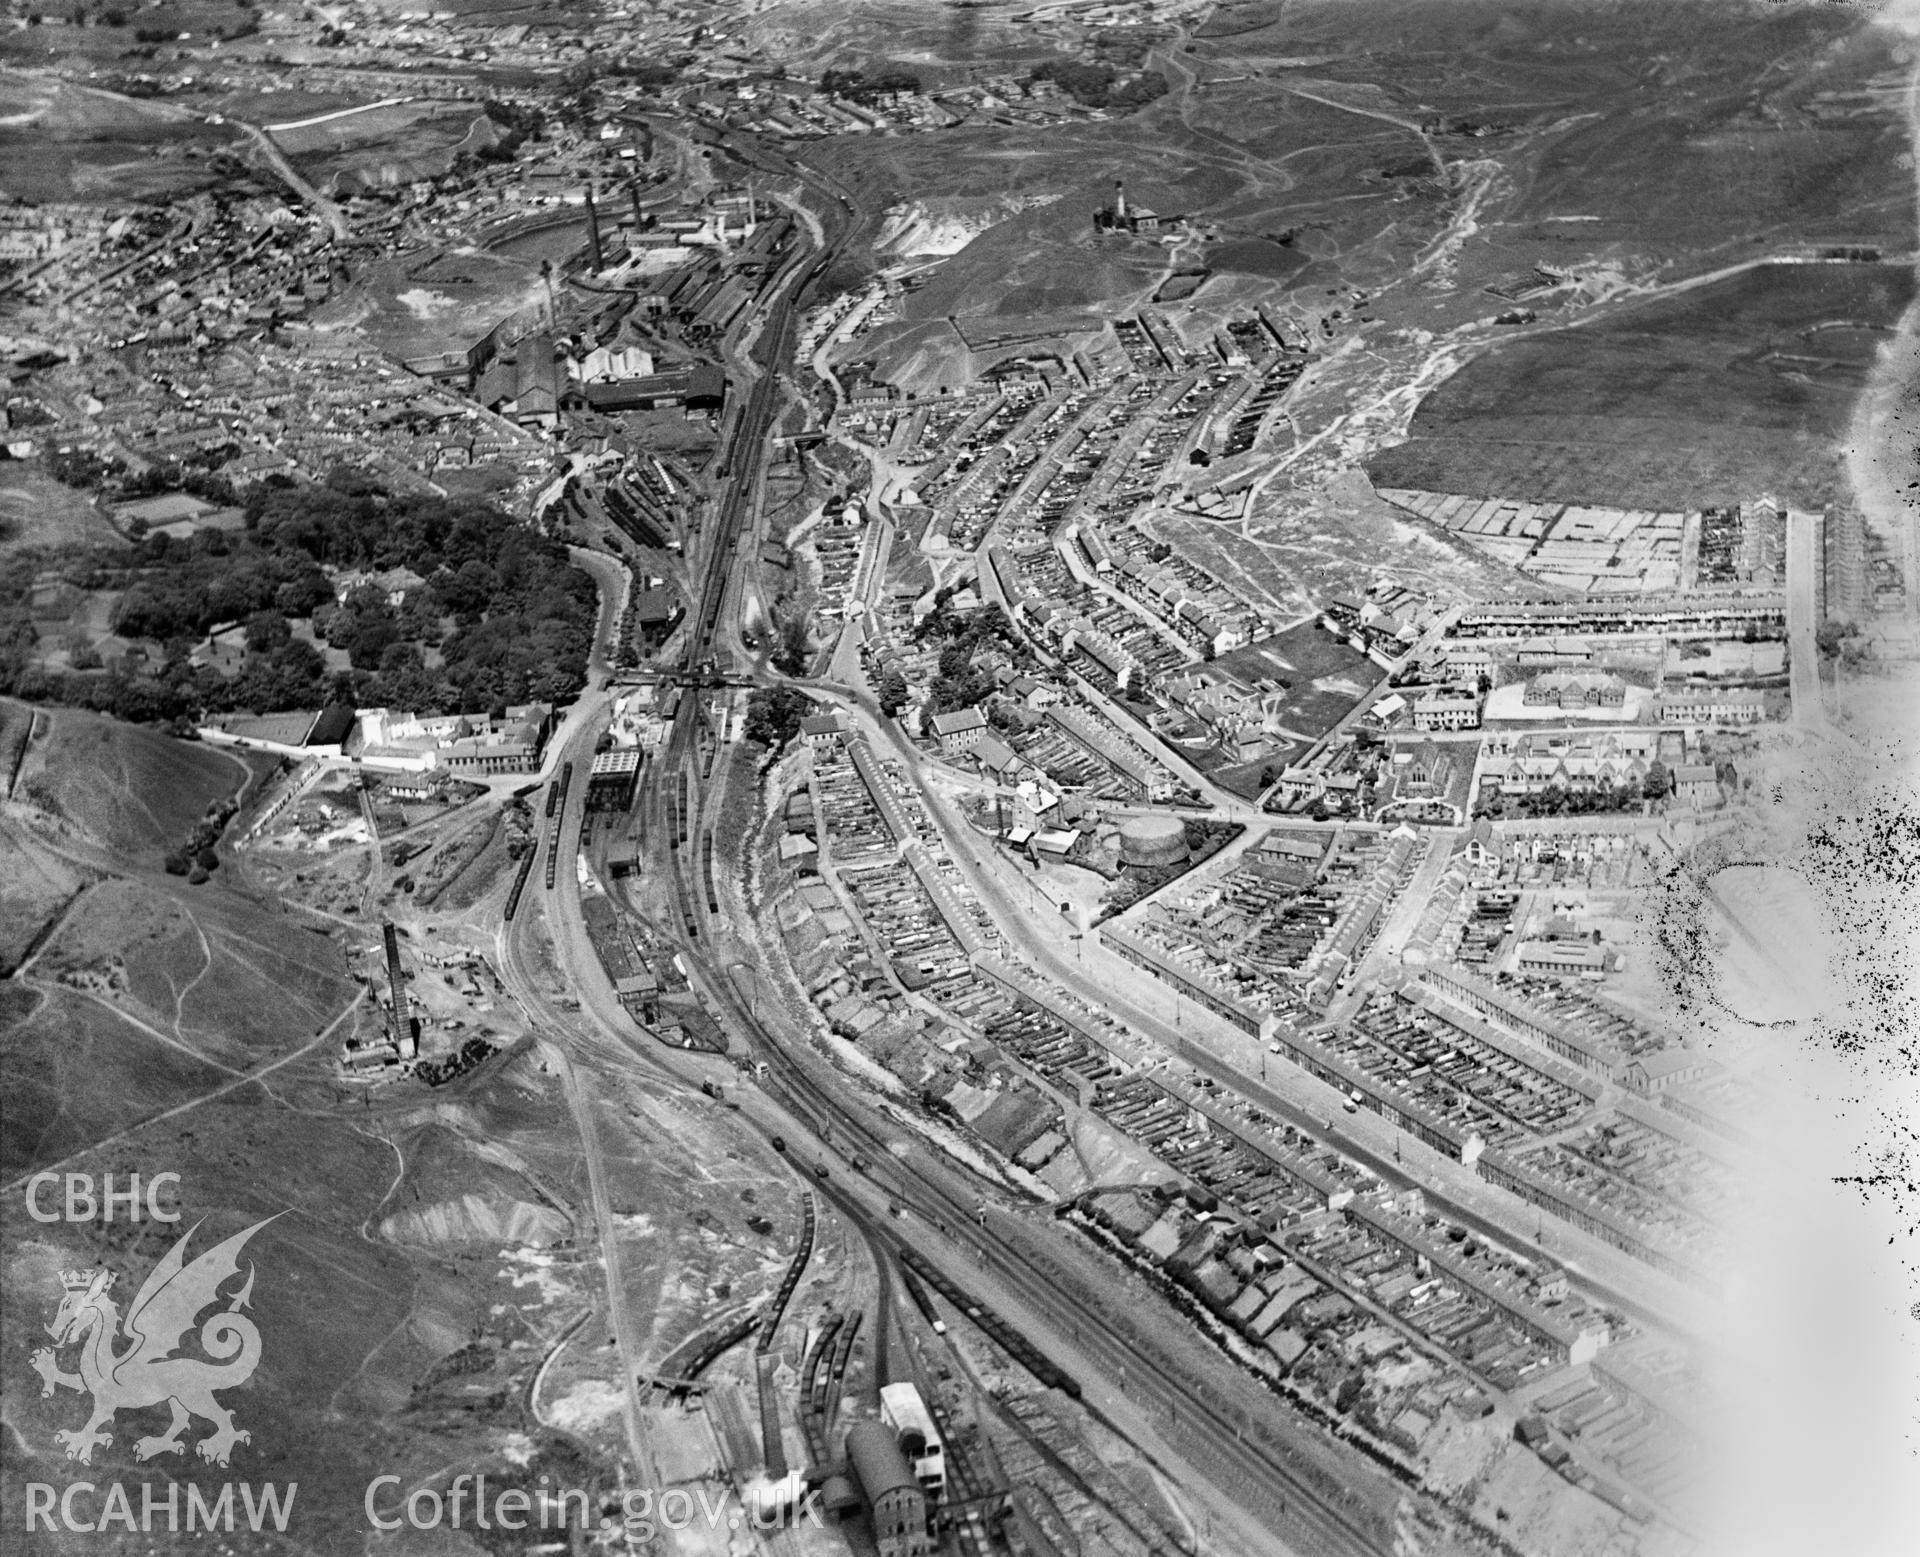 General view of Tredegar, oblique aerial view. 5?x4? black and white glass plate negative.